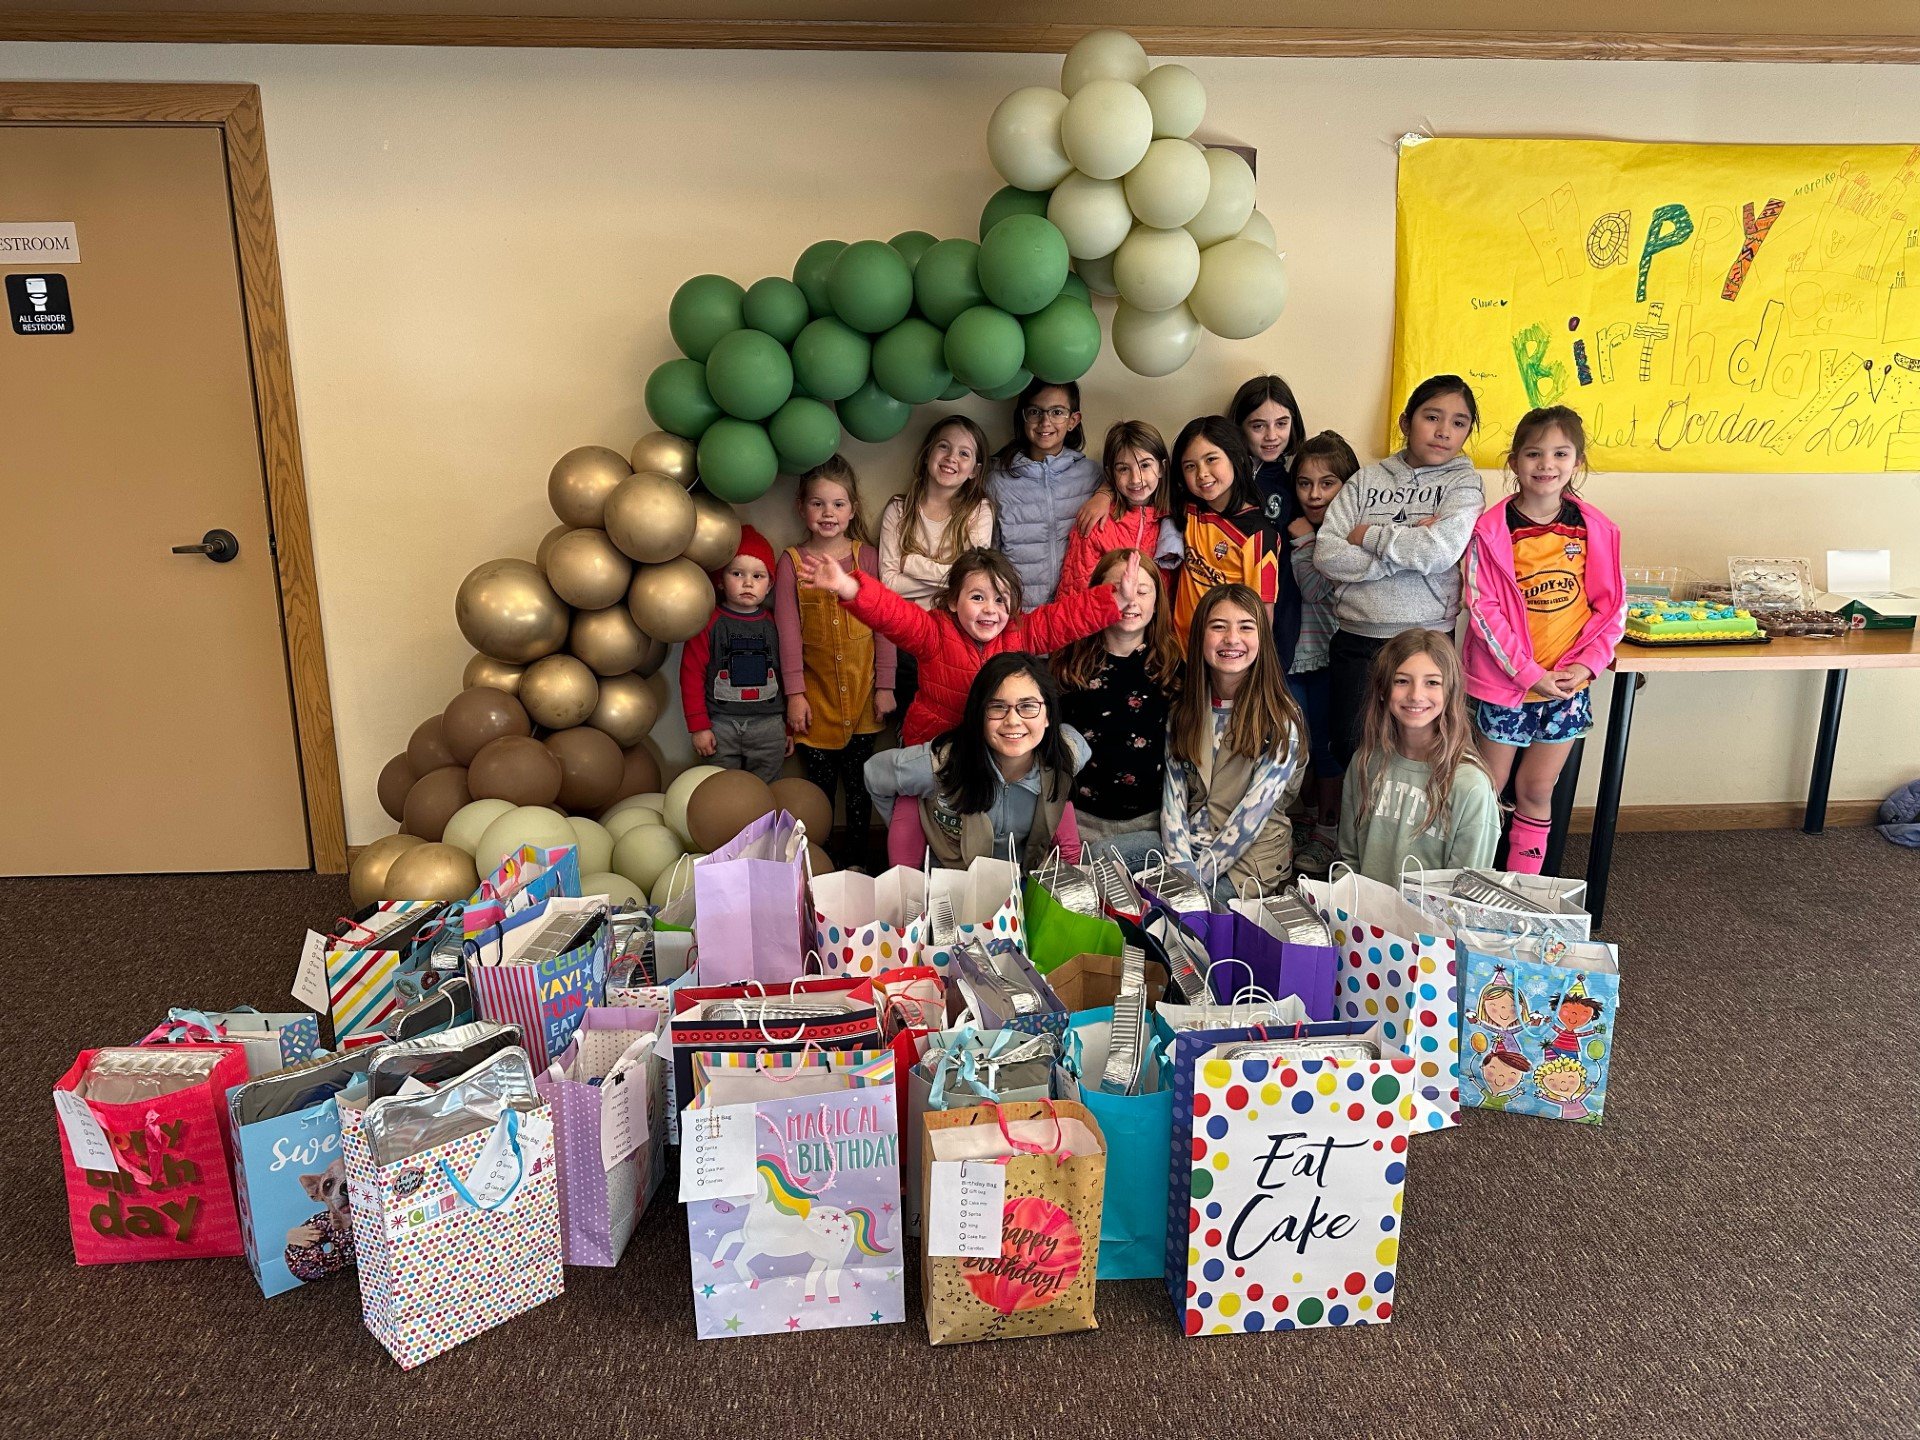 This Girl Scout troop celebrated the birthday of founder Juliette Gordon Low with an element of giving back to Ballard Food Bank. Pictured here, they pose with donations they collected.